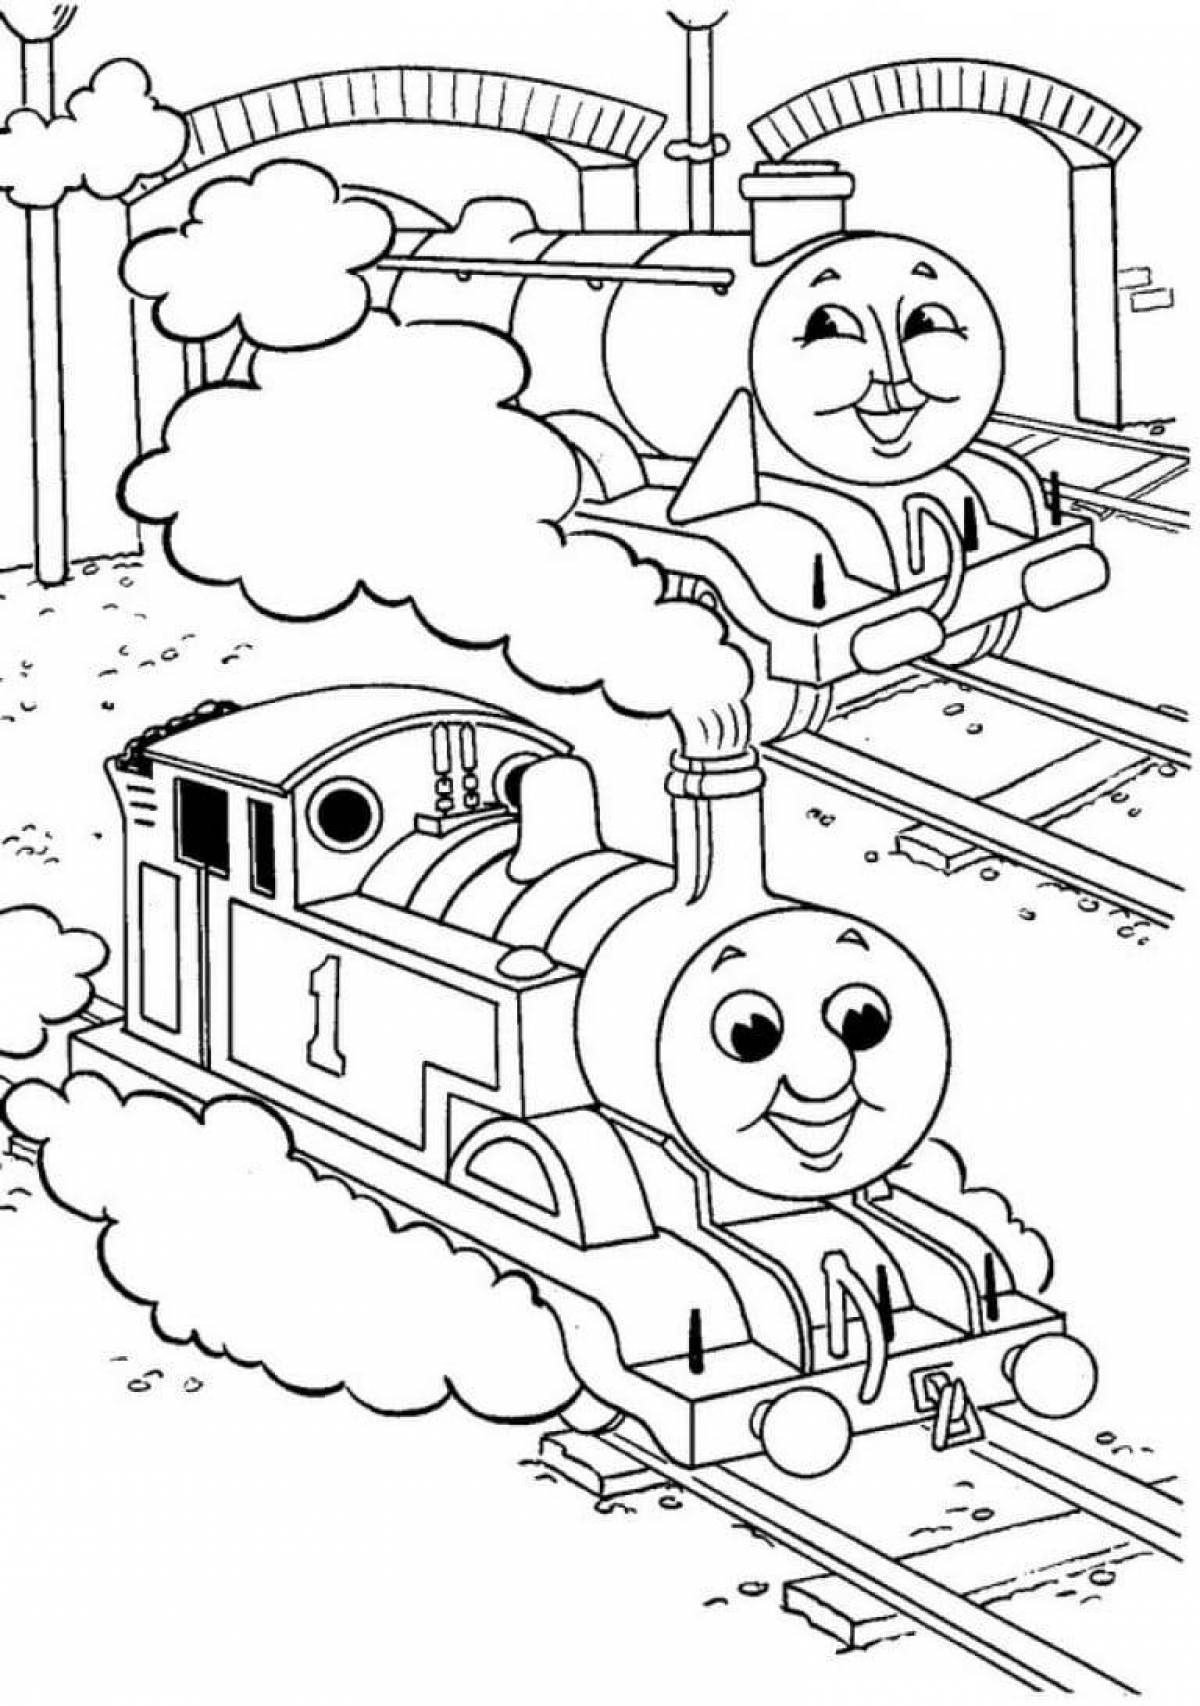 Thomas the Tank Engine coloring book